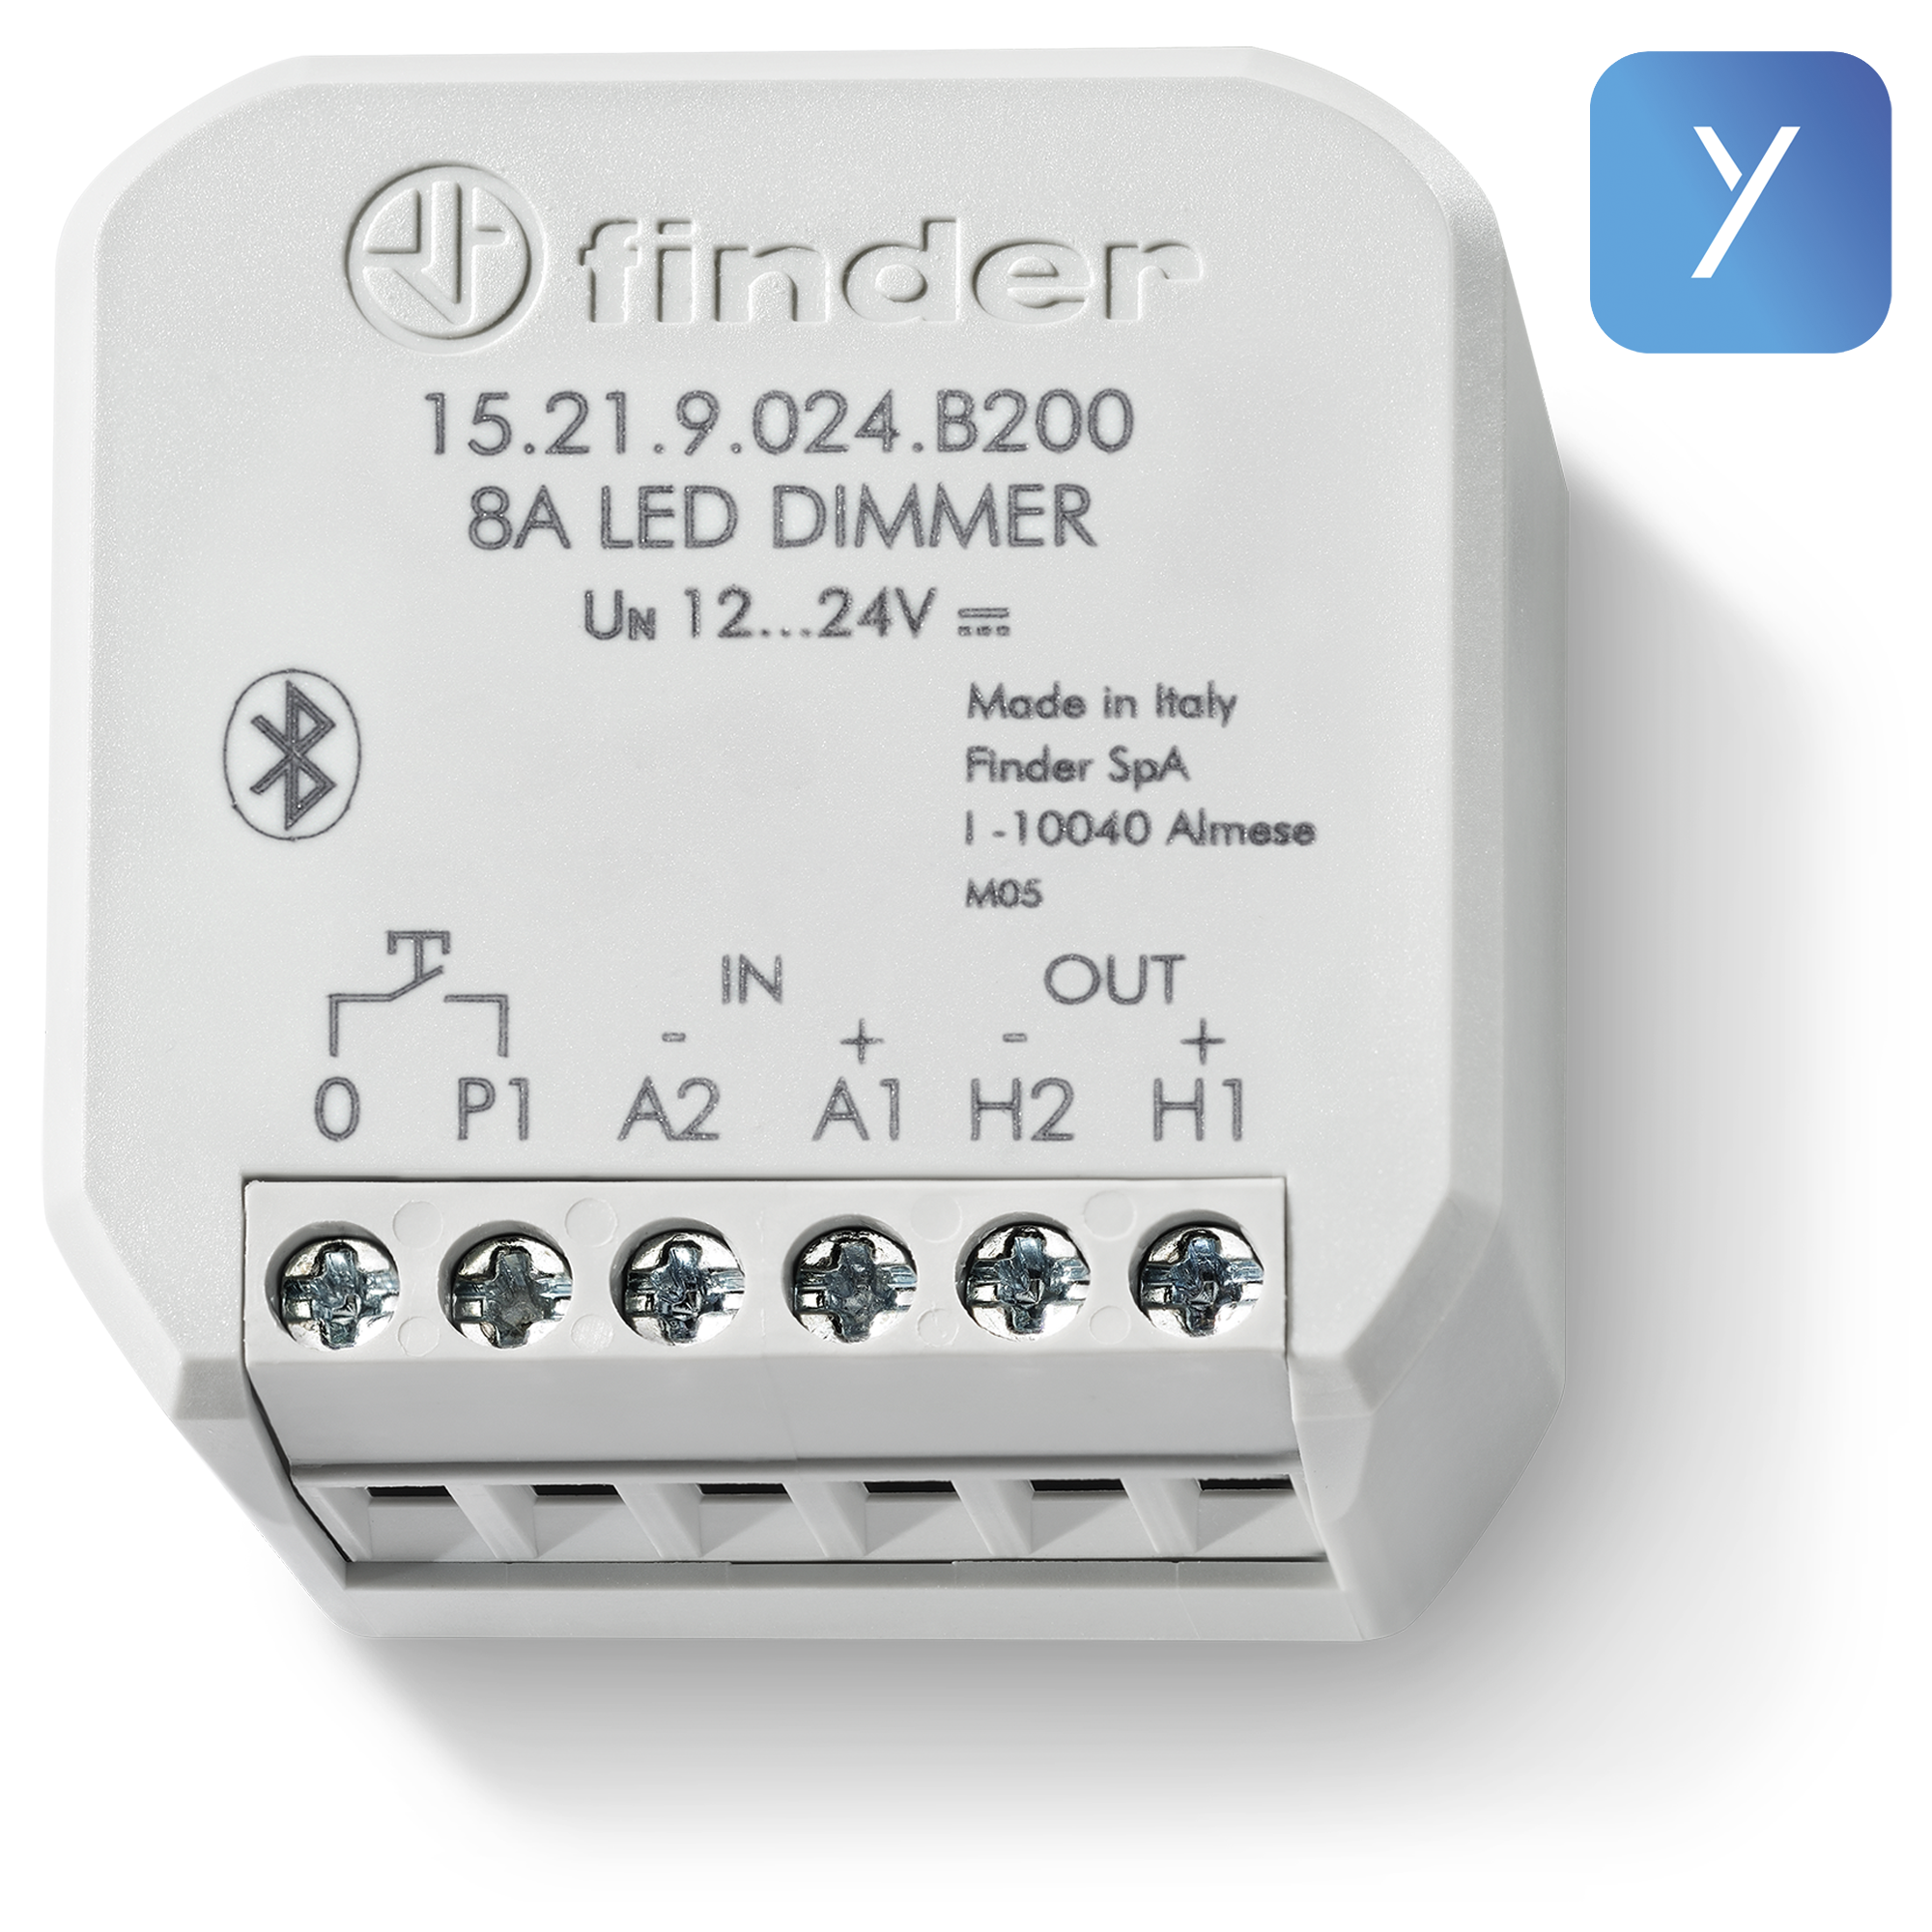 Tipo 15.21.9 - Varialuce (Dimmer) connesso YESLY